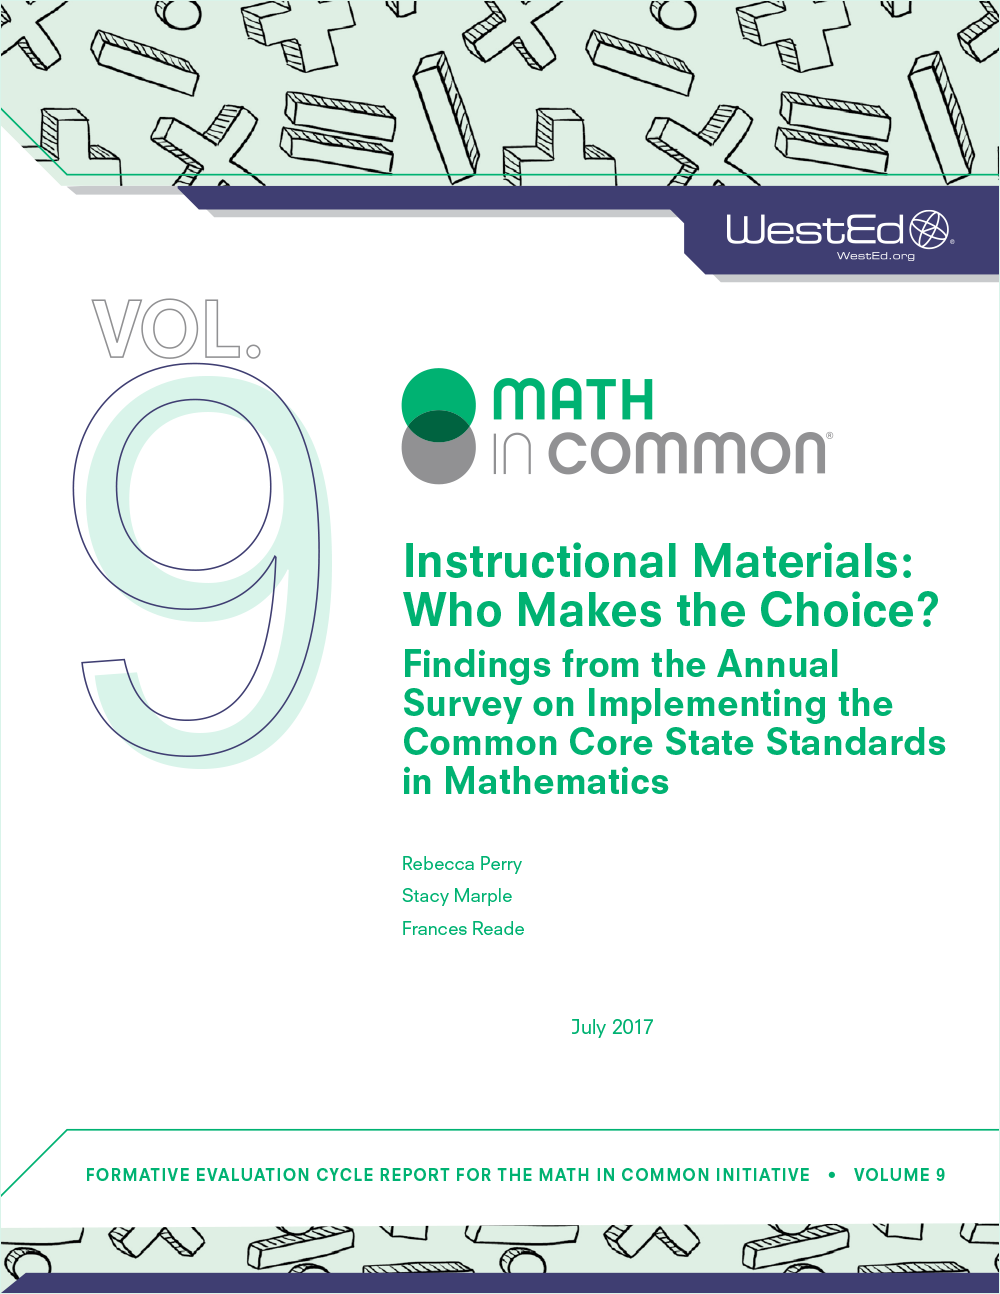 Instructional Materials: Who Makes the Choice? Findings from the Annual Survey on Implementing the Common Core State Standards in Mathematics